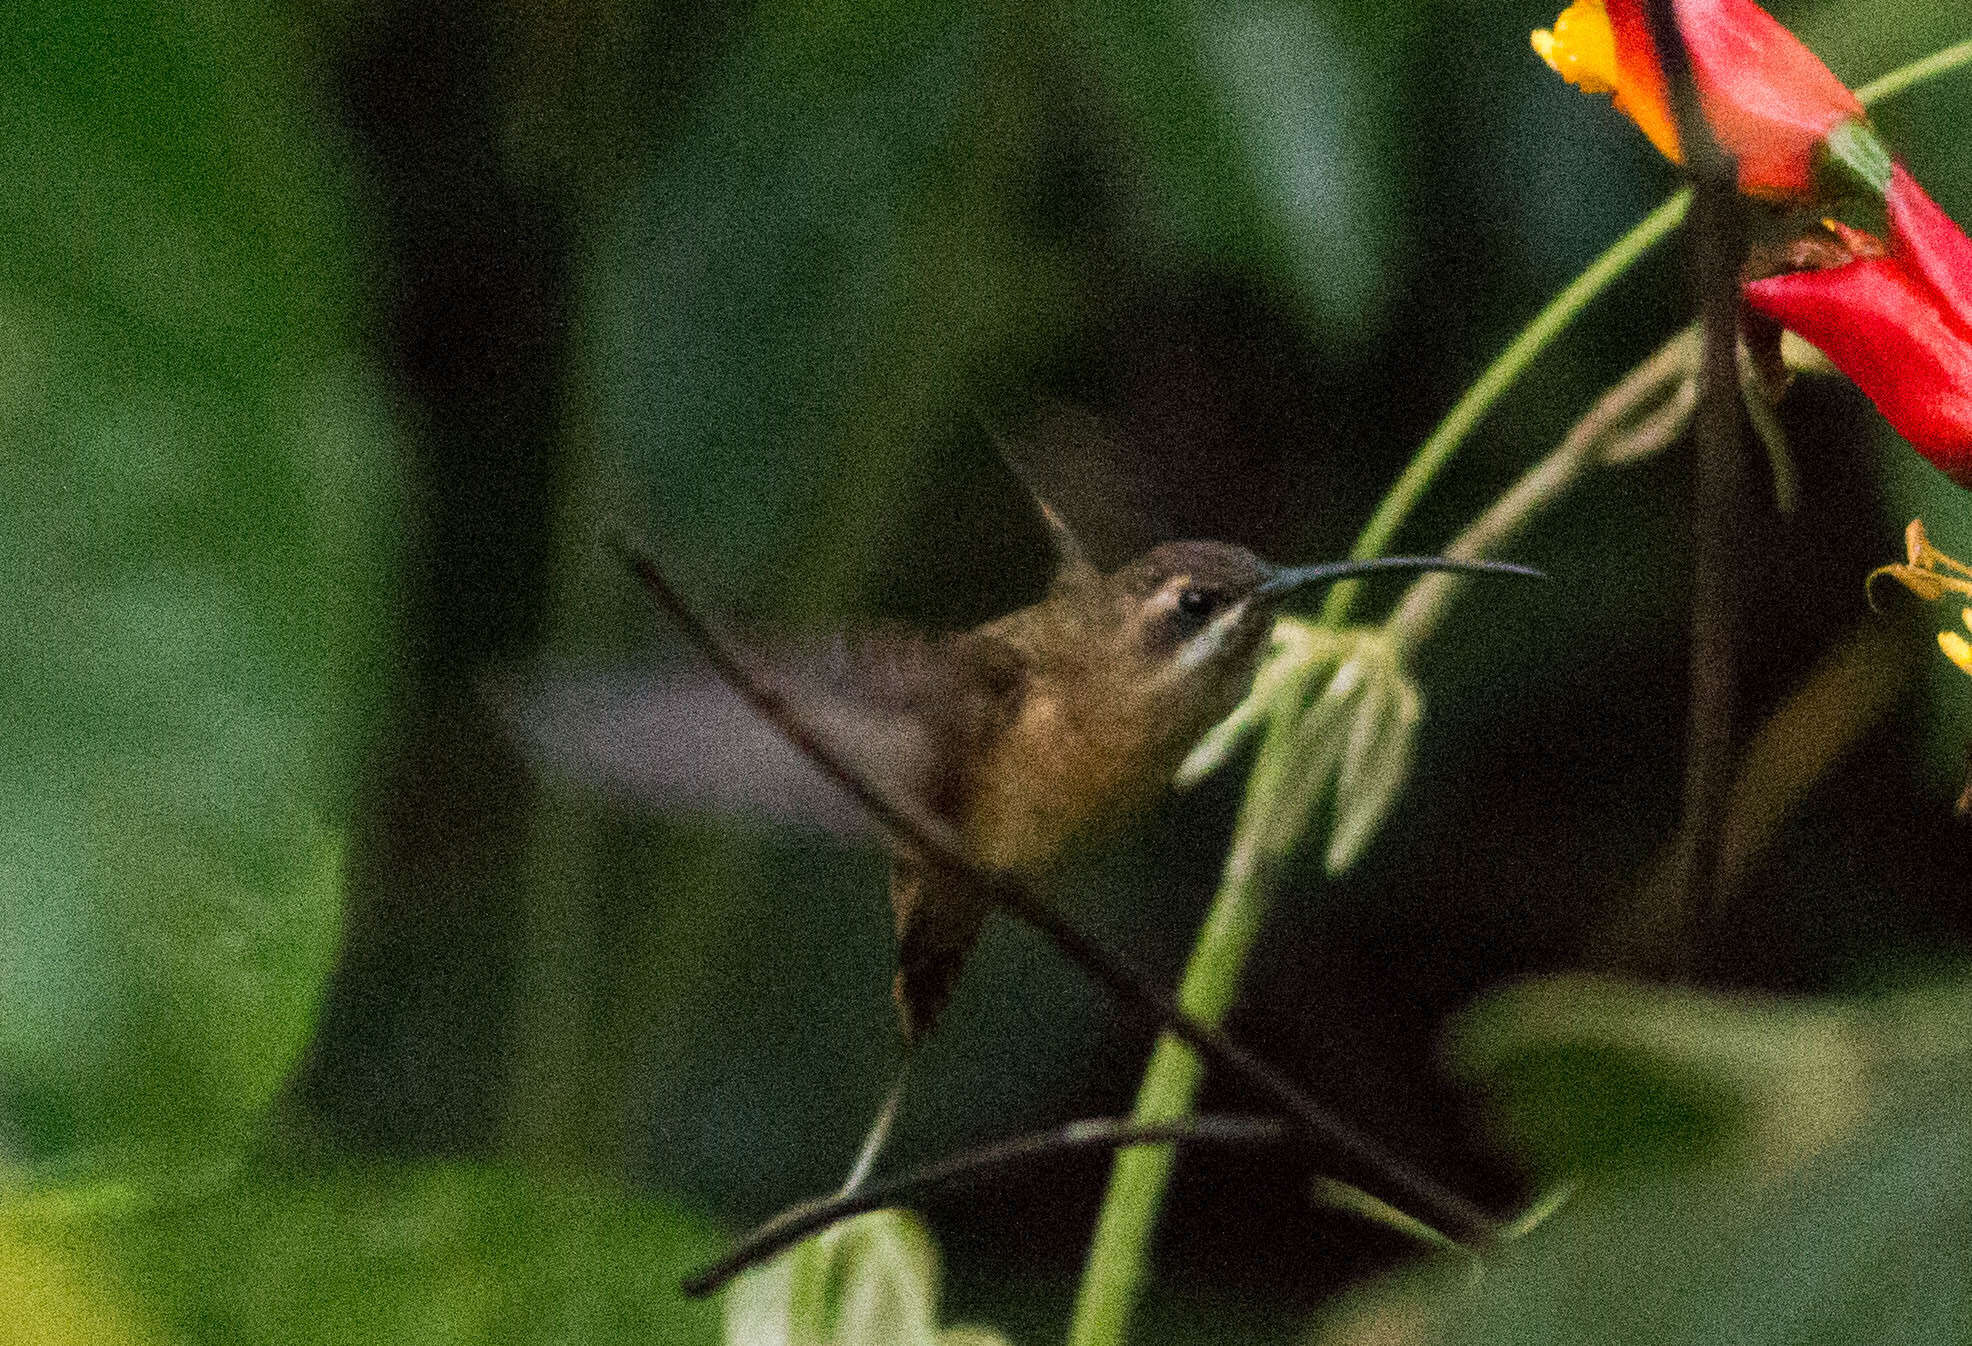 Image of Great-billed Hermit